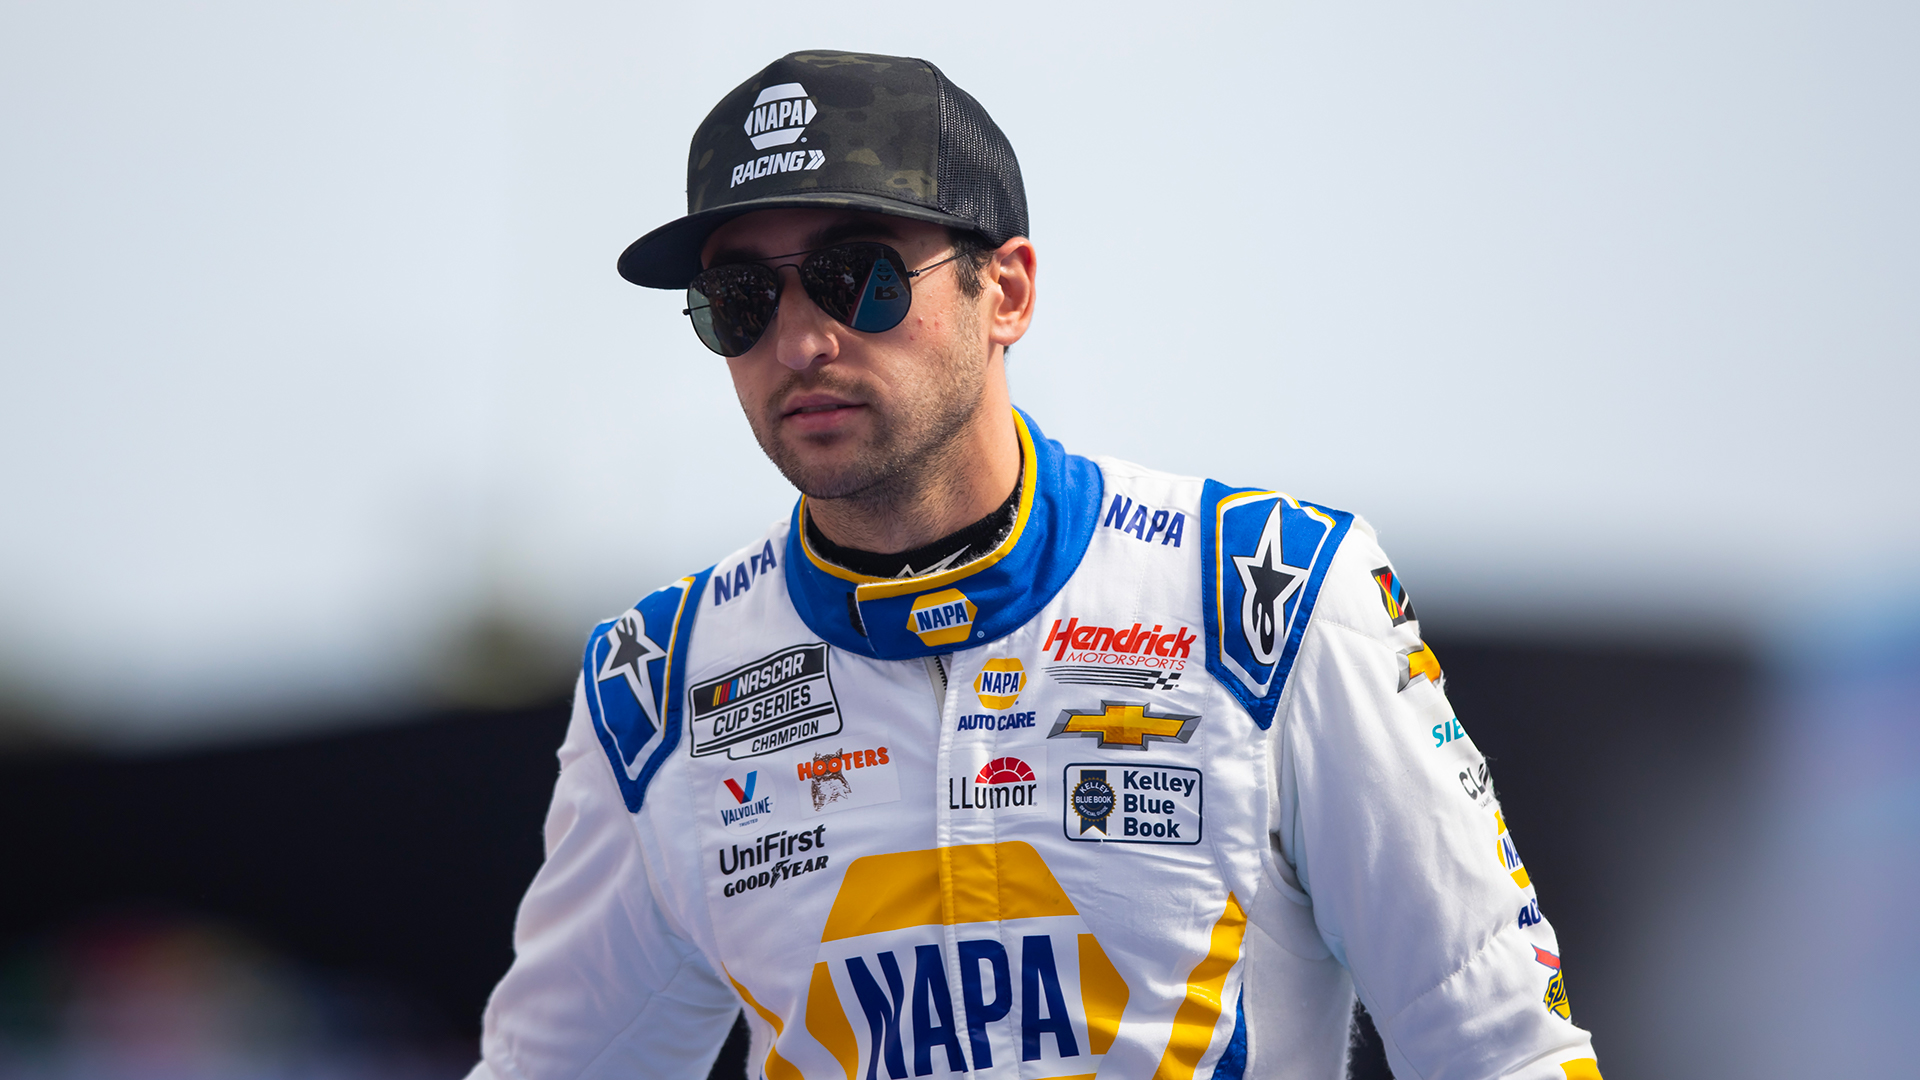 Elliott is “excited about the challenge” of qualifying for the NASCAR playoffs